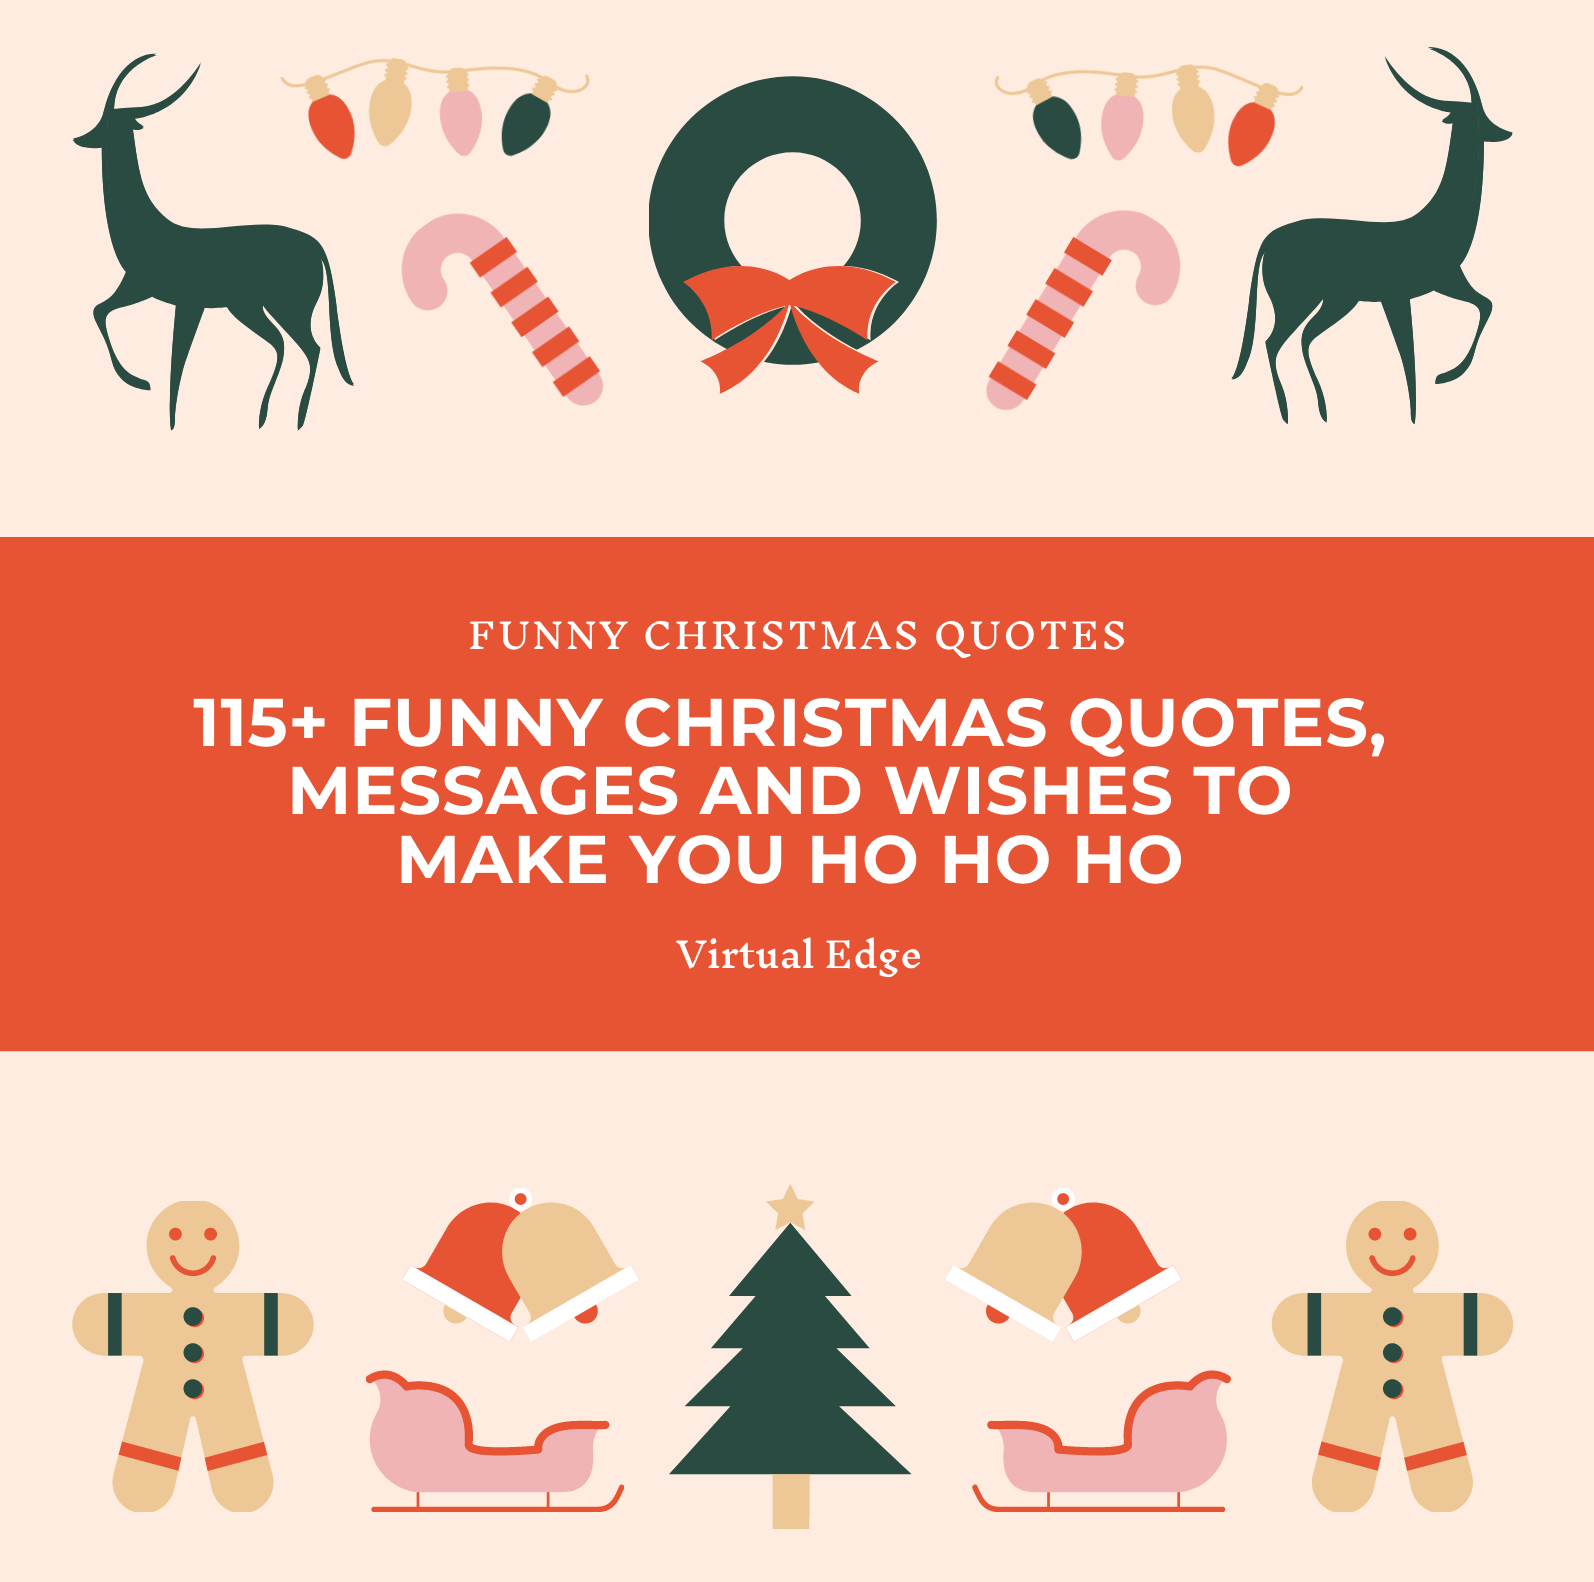 115+ Funny Christmas Quotes, Messages and Wishes to Make You Ho Ho Ho